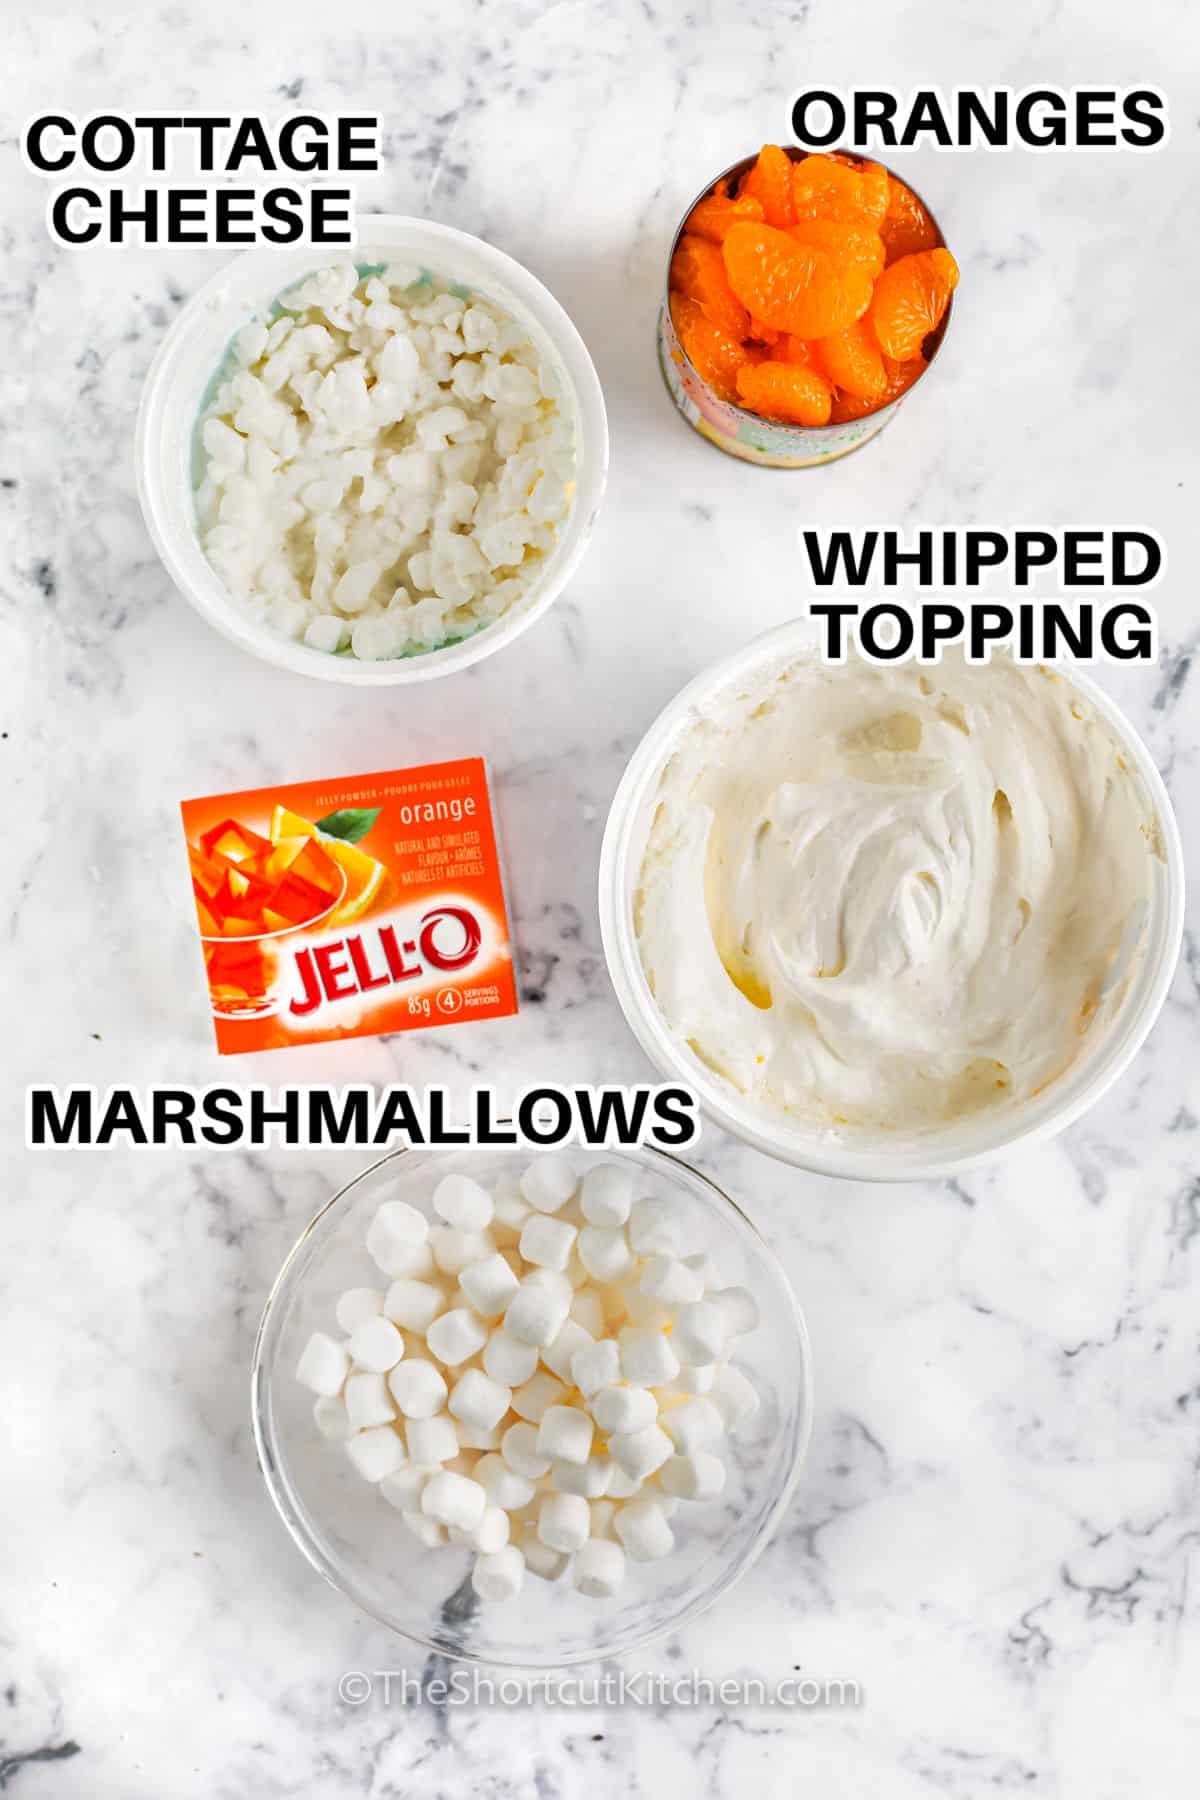 whipped topping , oranges , cottage cheese , jello and marshmallows to make Cottage Cheese Orange Jello Salad with labels